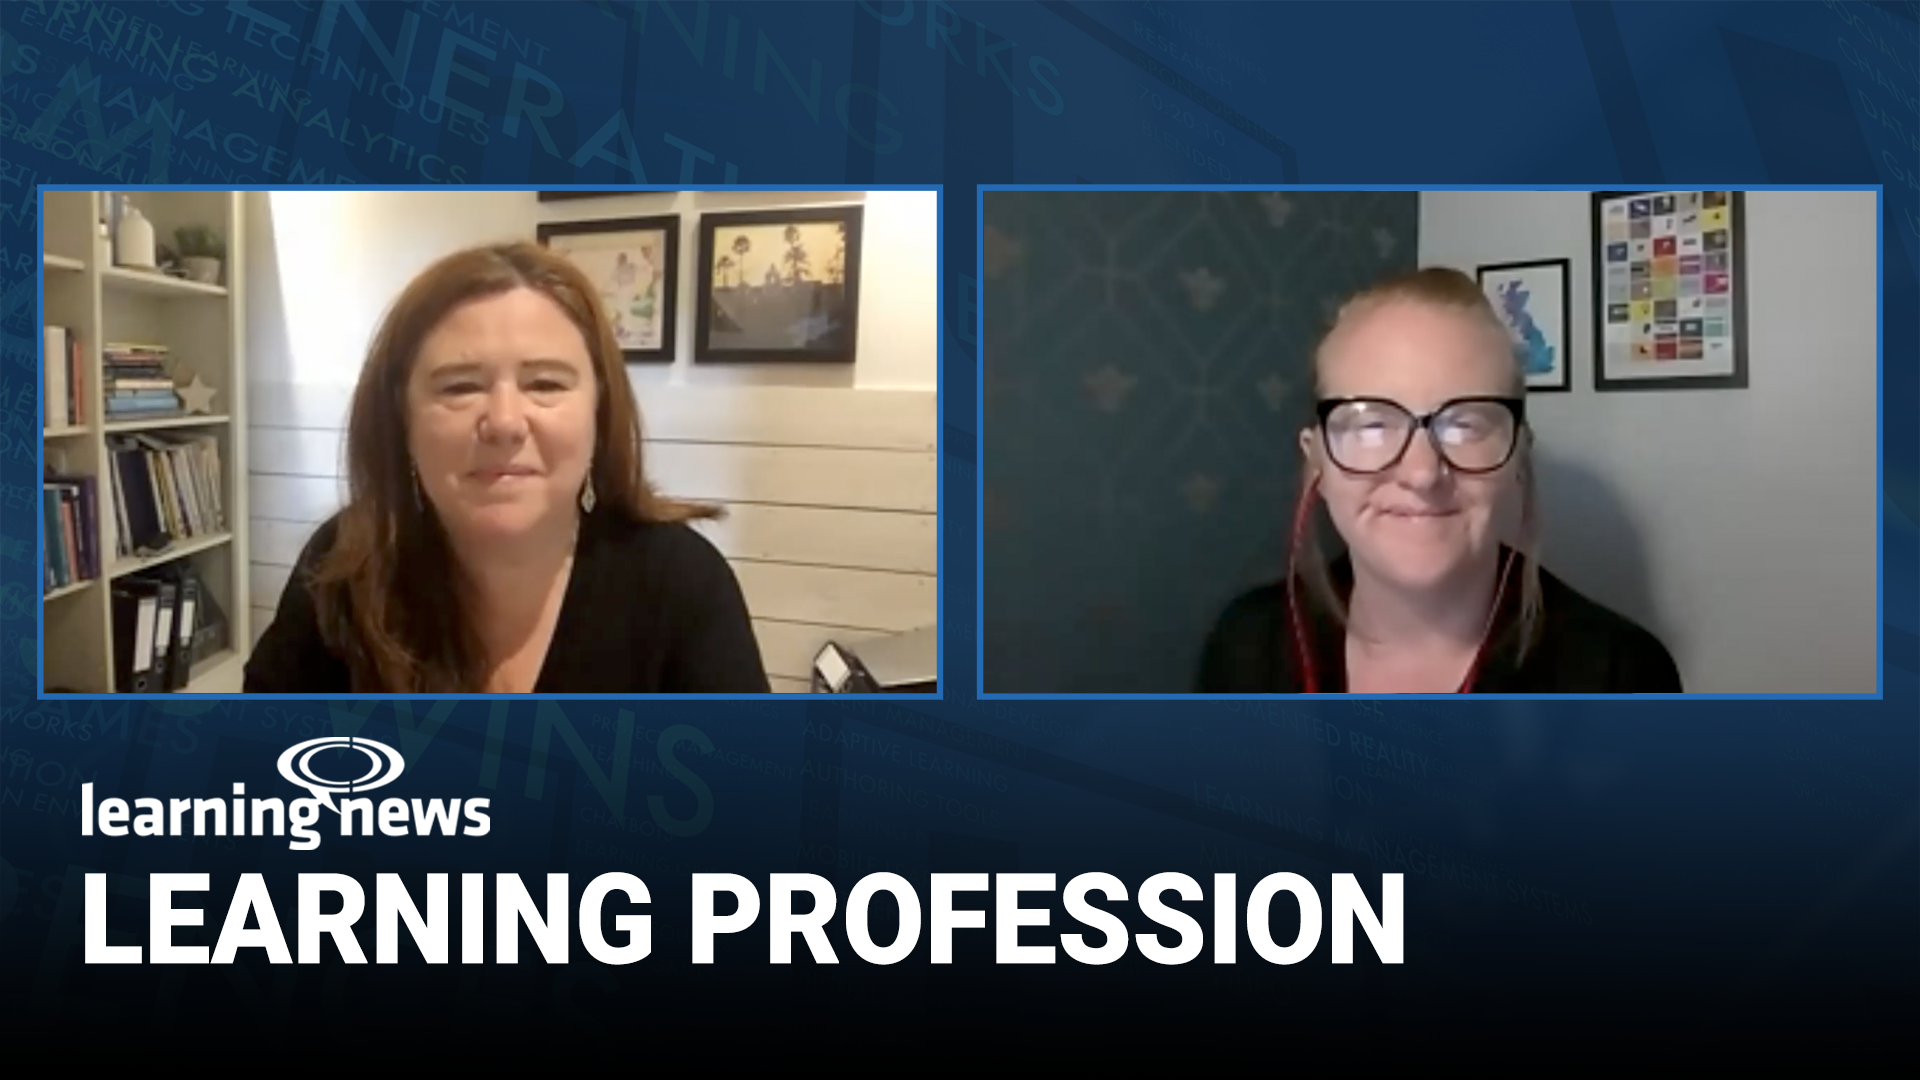 Jane Daly and Gemma Wells join Learning News to discuss the learning profession